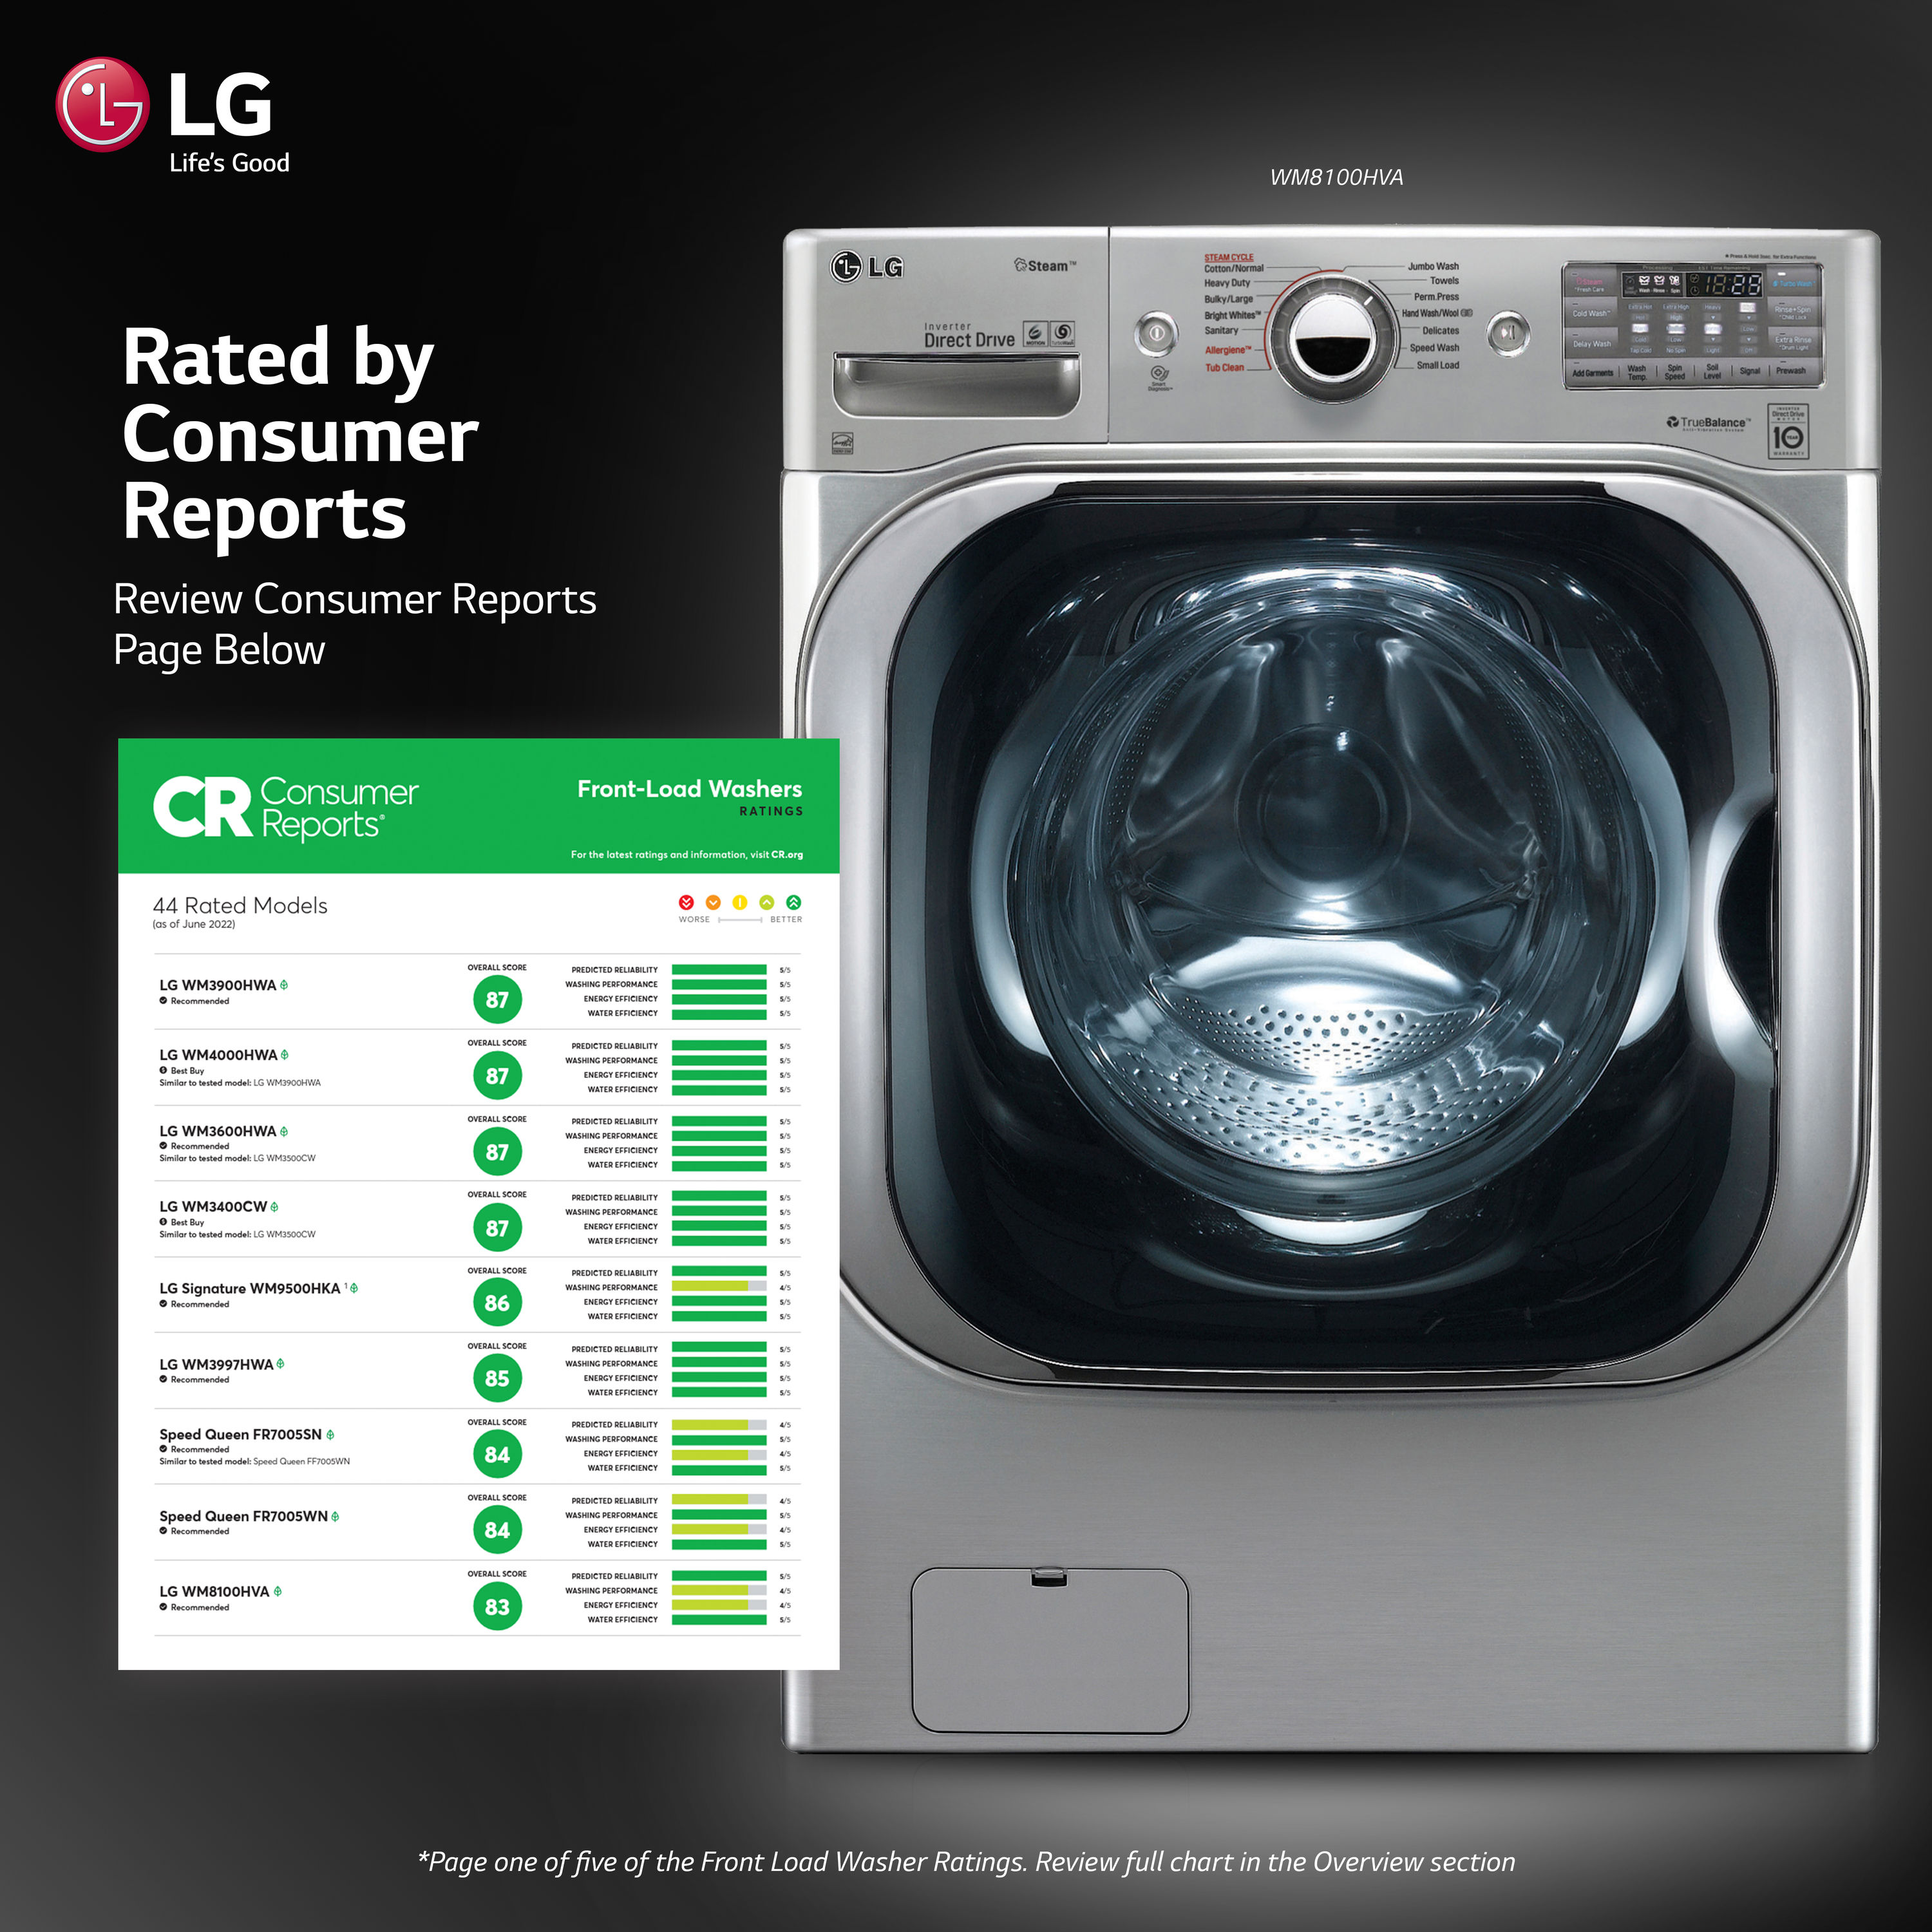 LG WM8100HVA 29 Inch Front Load Smart Washer with 5.2 Cu. Ft. Capacity,  Dial-A-Cycle™, SenseClean™, LoDecibel™ Operation, SMARTTHINQ®,  SmartDiagnosis™, 14 Wash Cycles, Steam, Sanitize, Speed Wash, Allergiene™,  and ENERGY STAR®: Graphite Steel